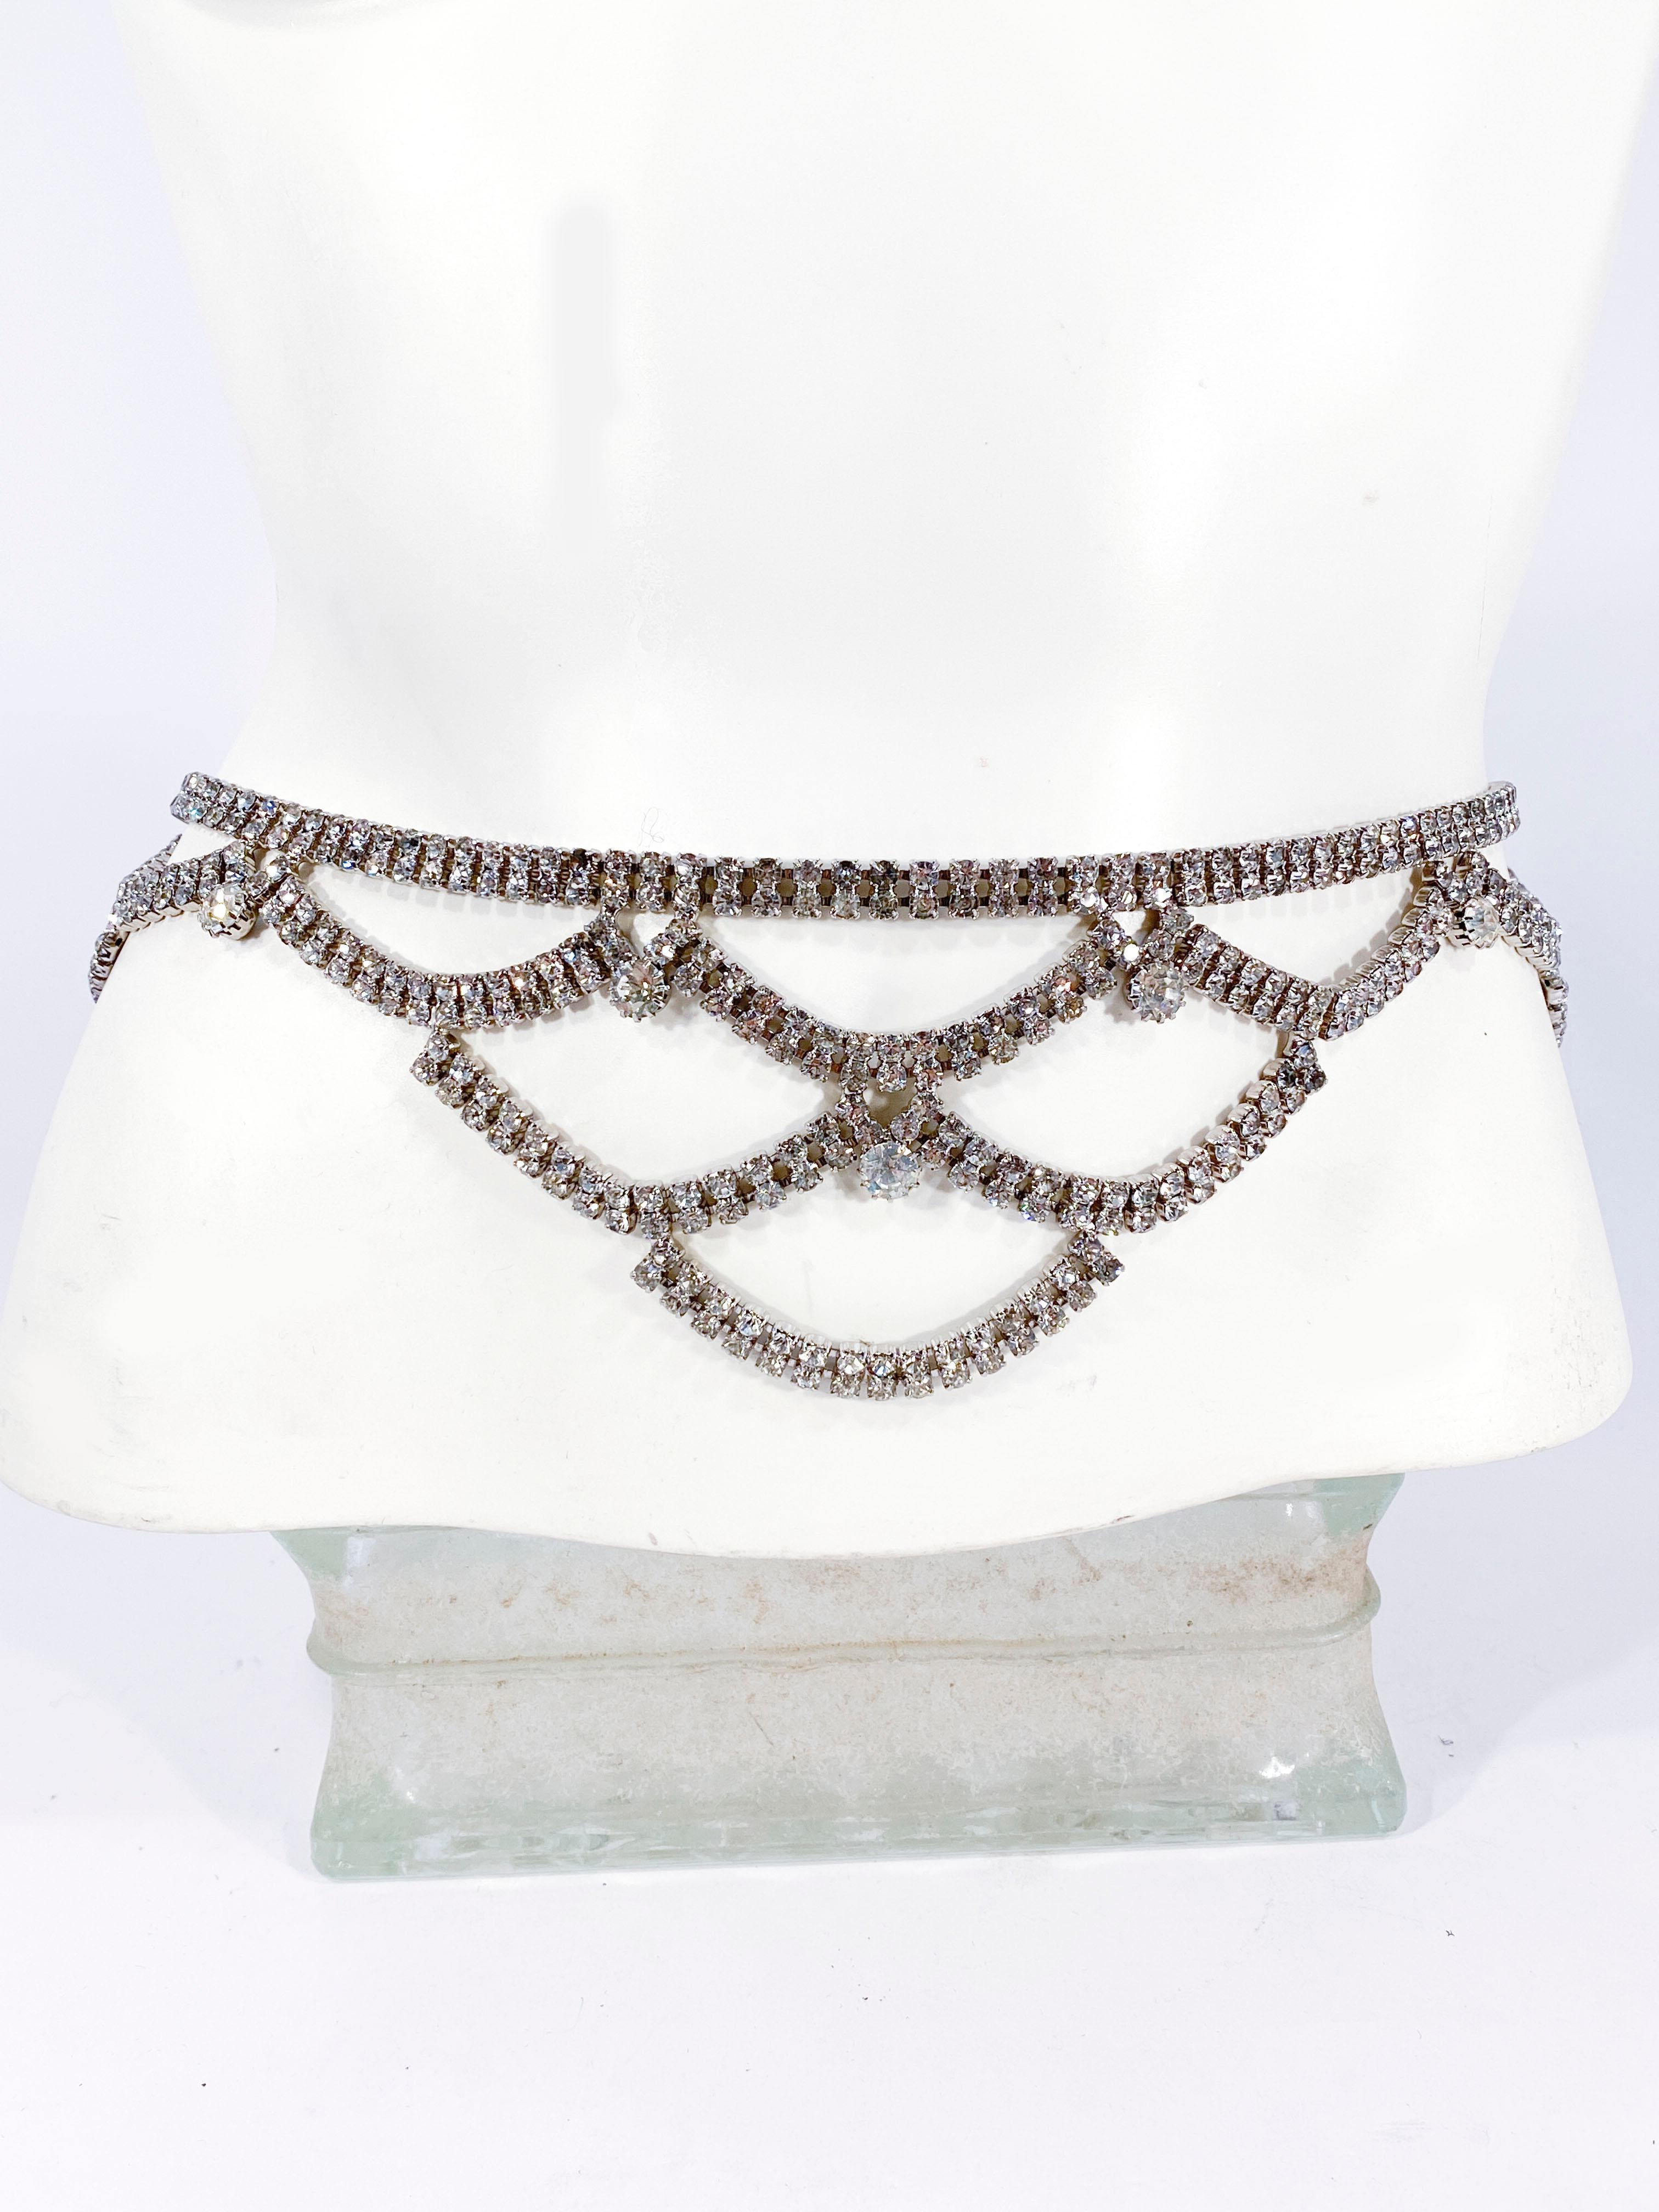 Vintage Rhinestone belt with tiered strands. This belt can be worn both on the waist and at the hip. The closure is a hook and adjustable stopper.